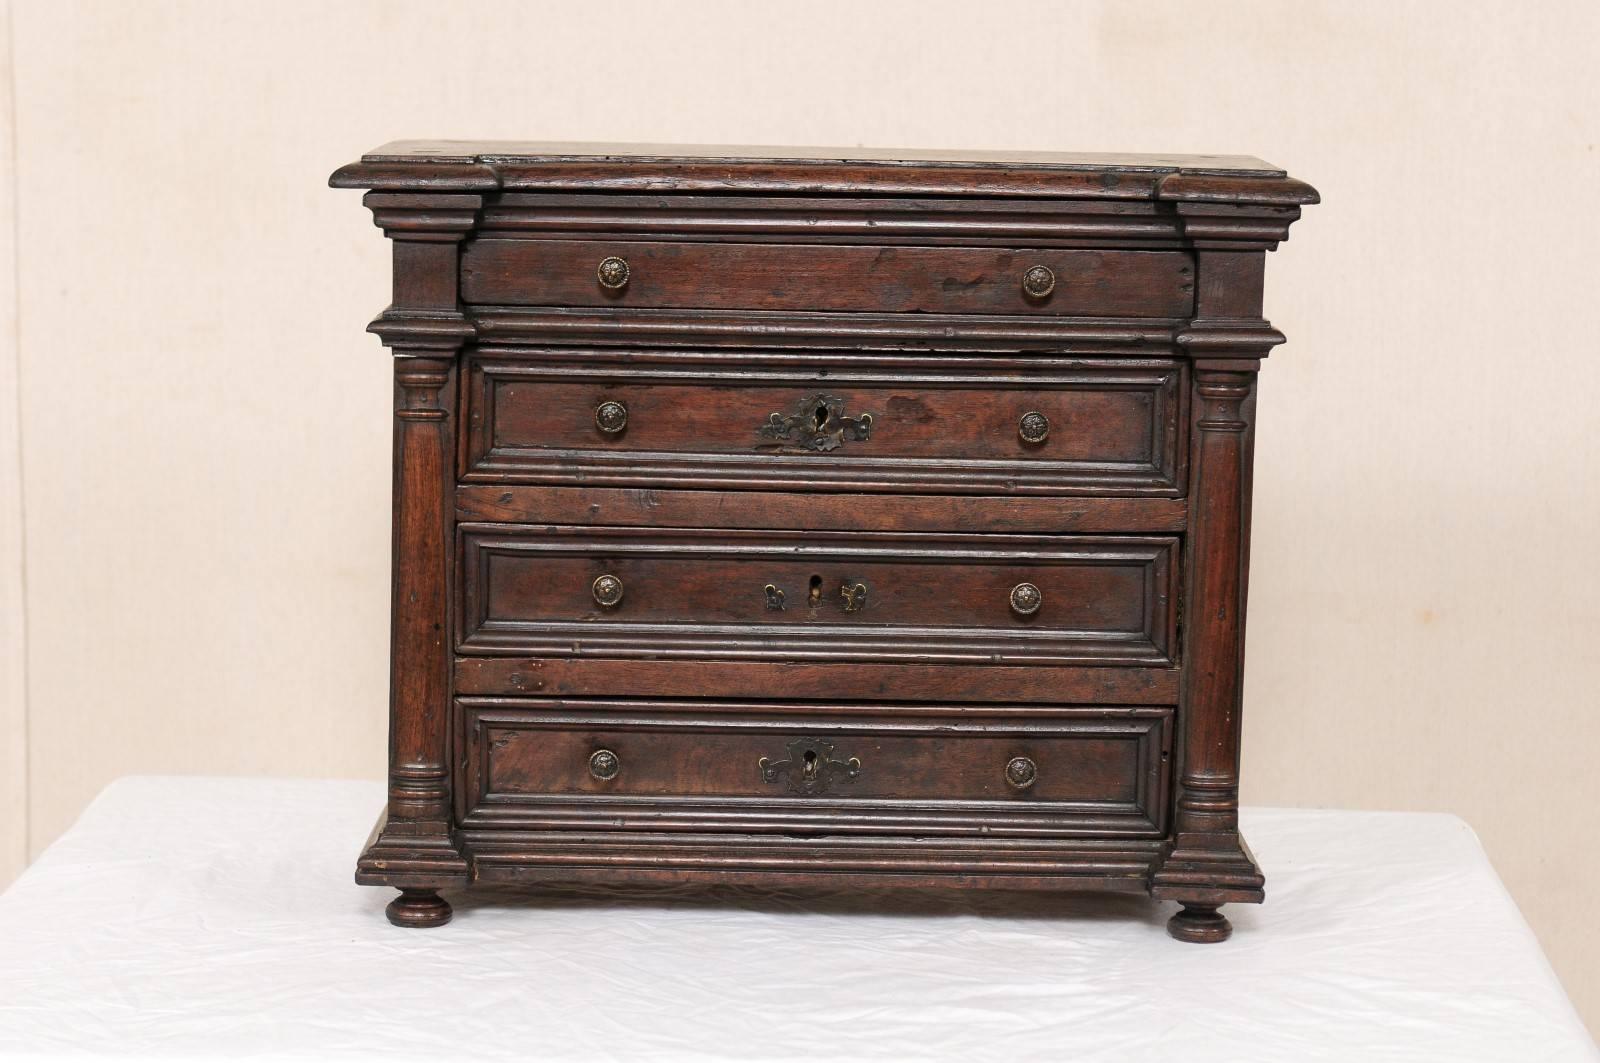 Carved Italian Early 18th Century Petite-Sized Walnut Chest w/Drawers for Table-Top  For Sale